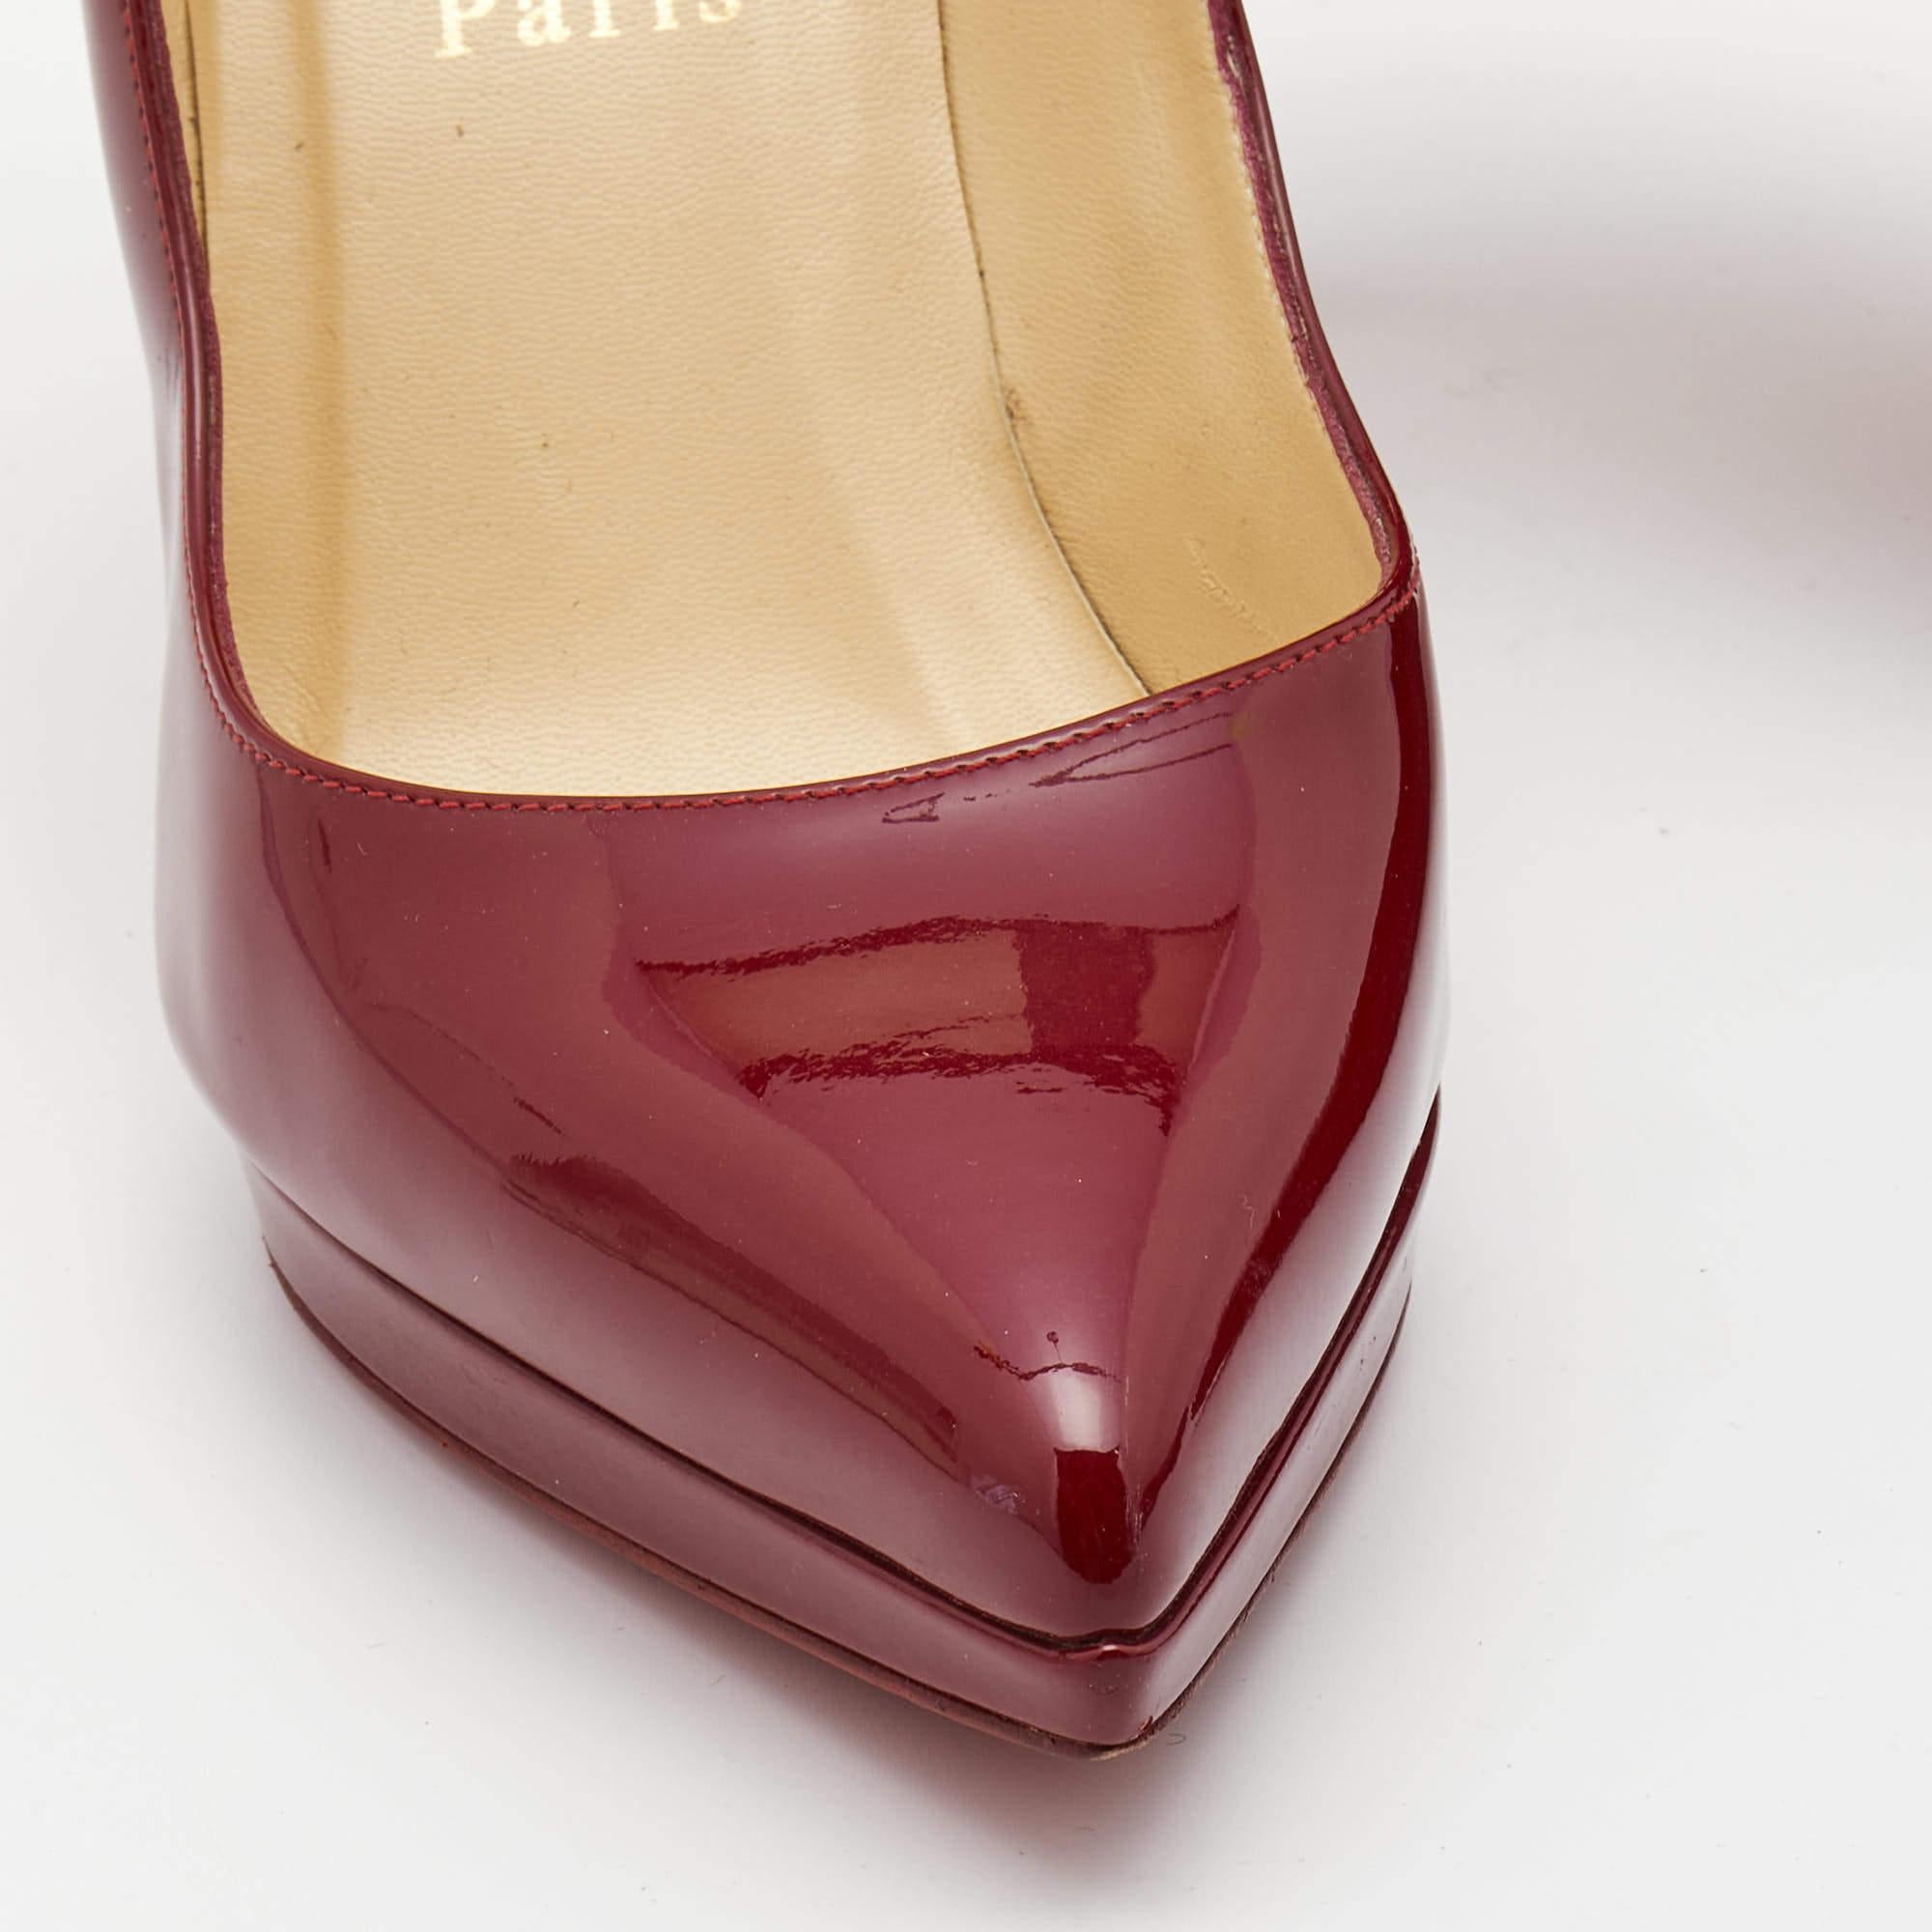 Christian Louboutin Burgundy Patent Leather Pigalle Plato Pumps Size 37.5 3